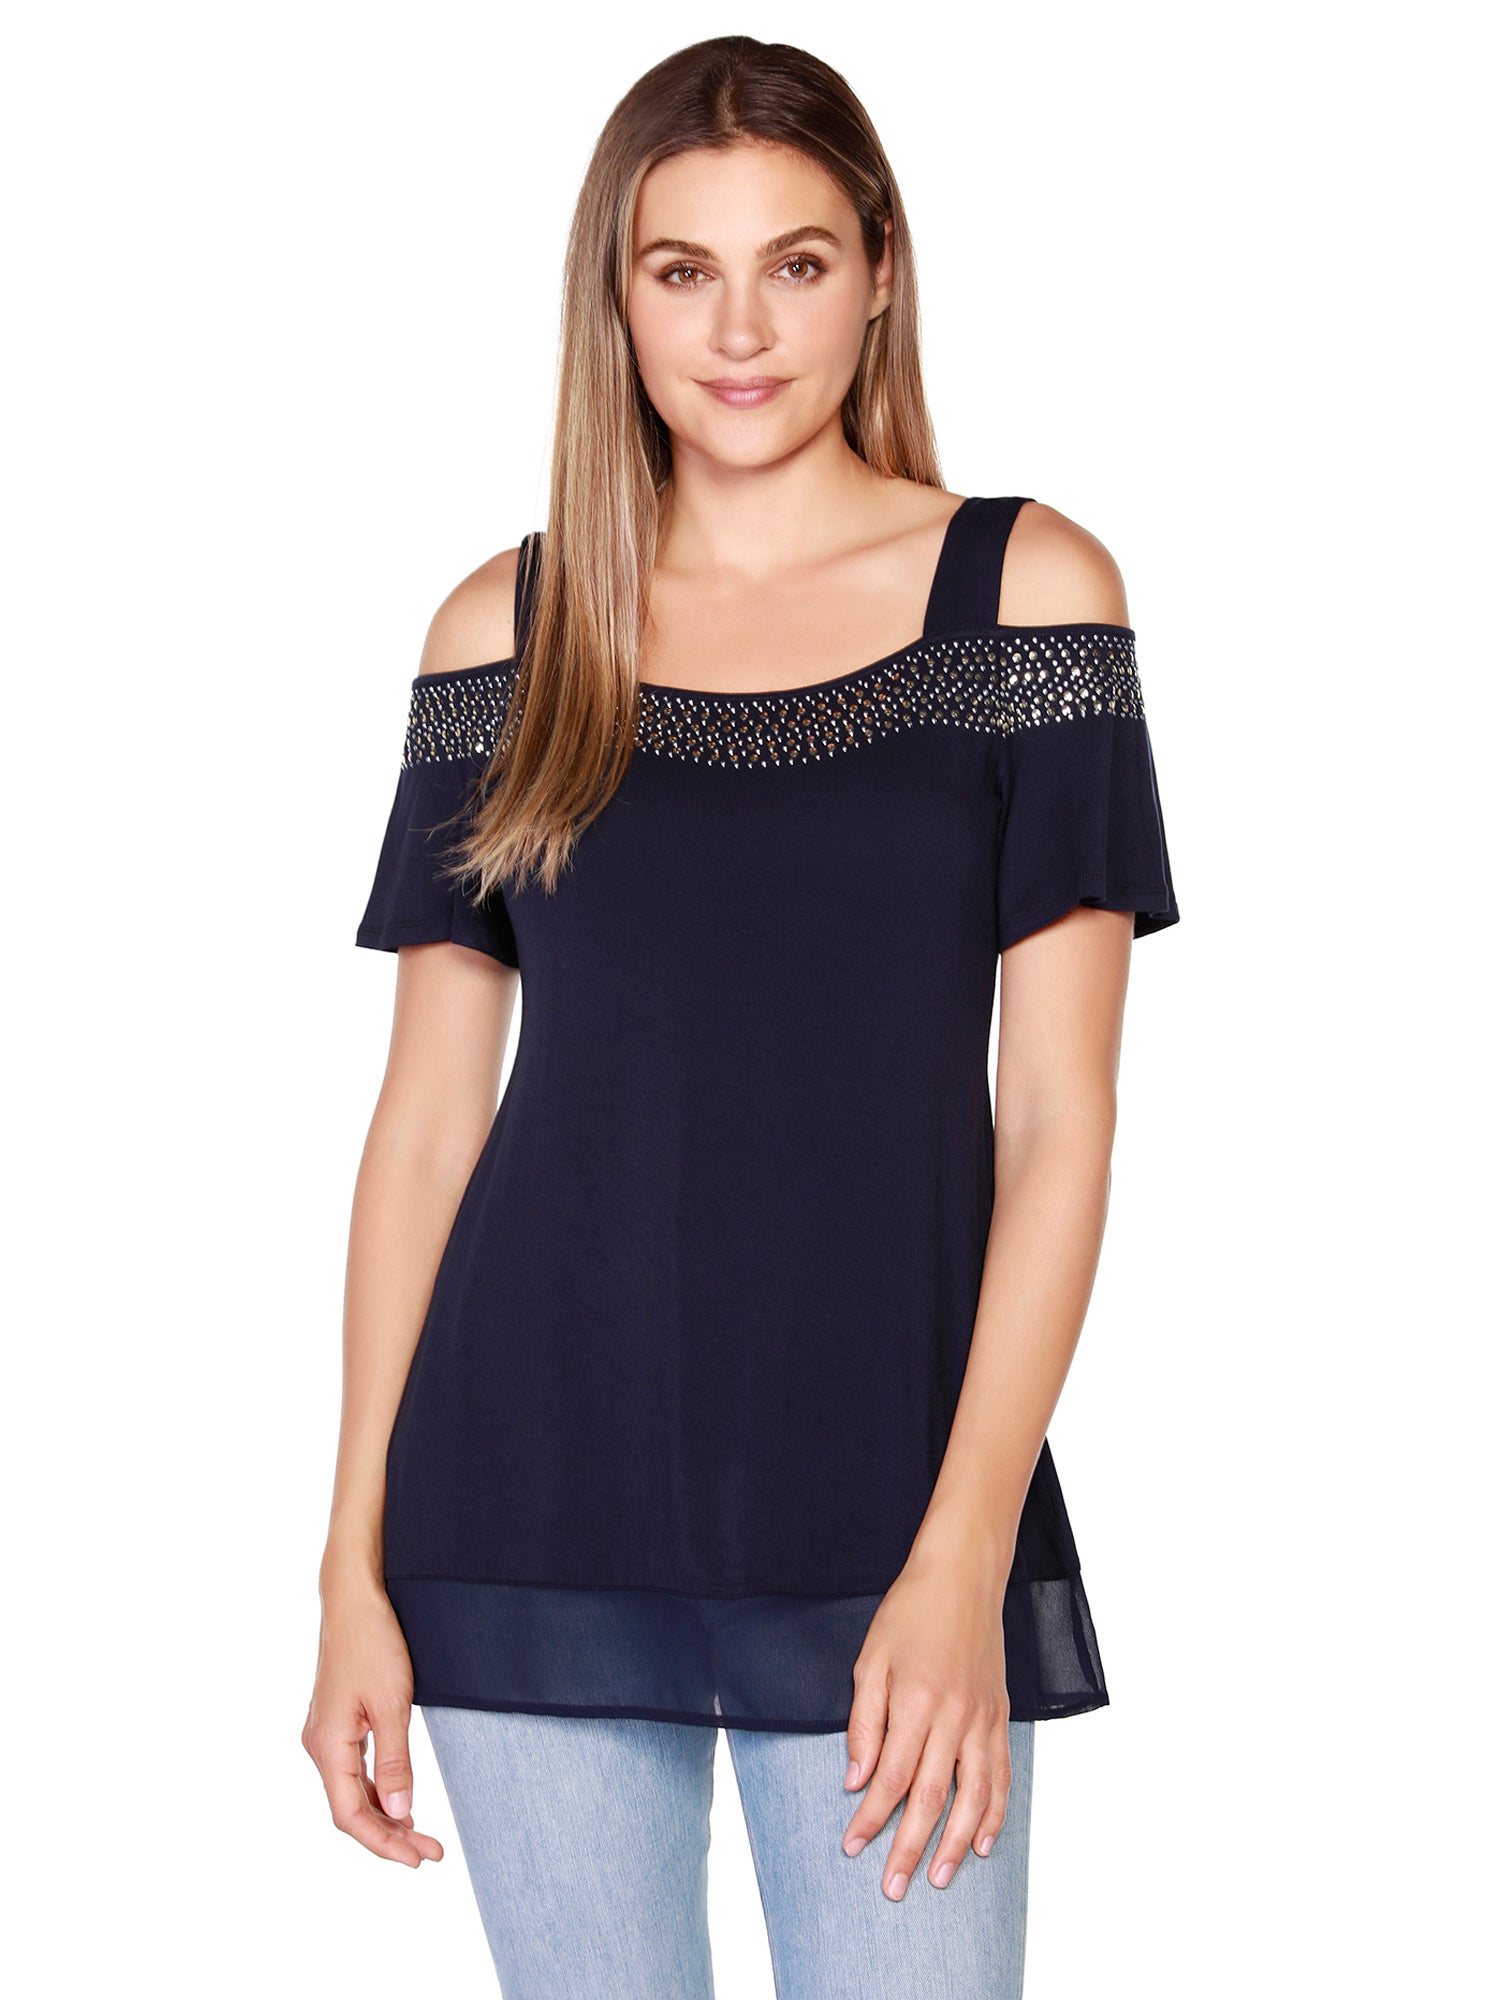 Women's Cold Shoulder Pull Over Top with Flutter Sleeves and Stud and Sequin Trim